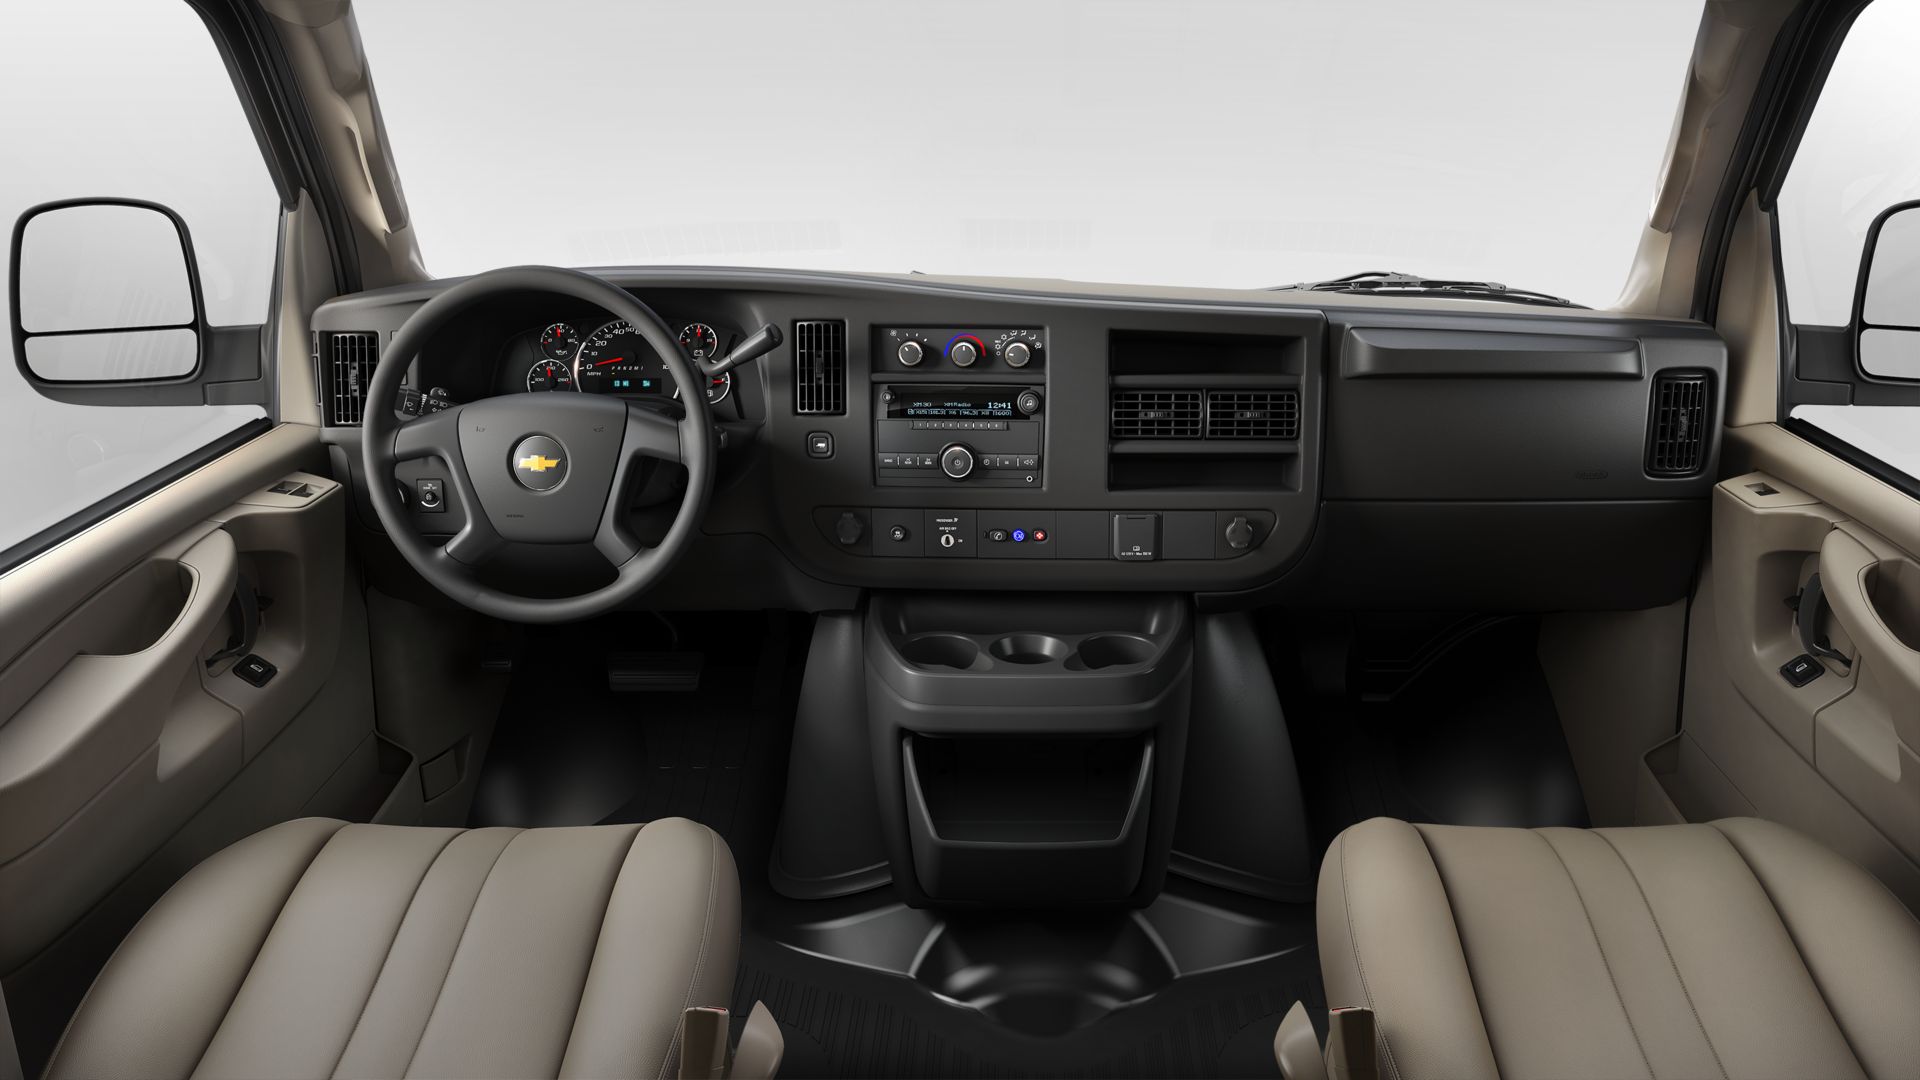 2019 Chevrolet Express Interior Colors Gm Authority